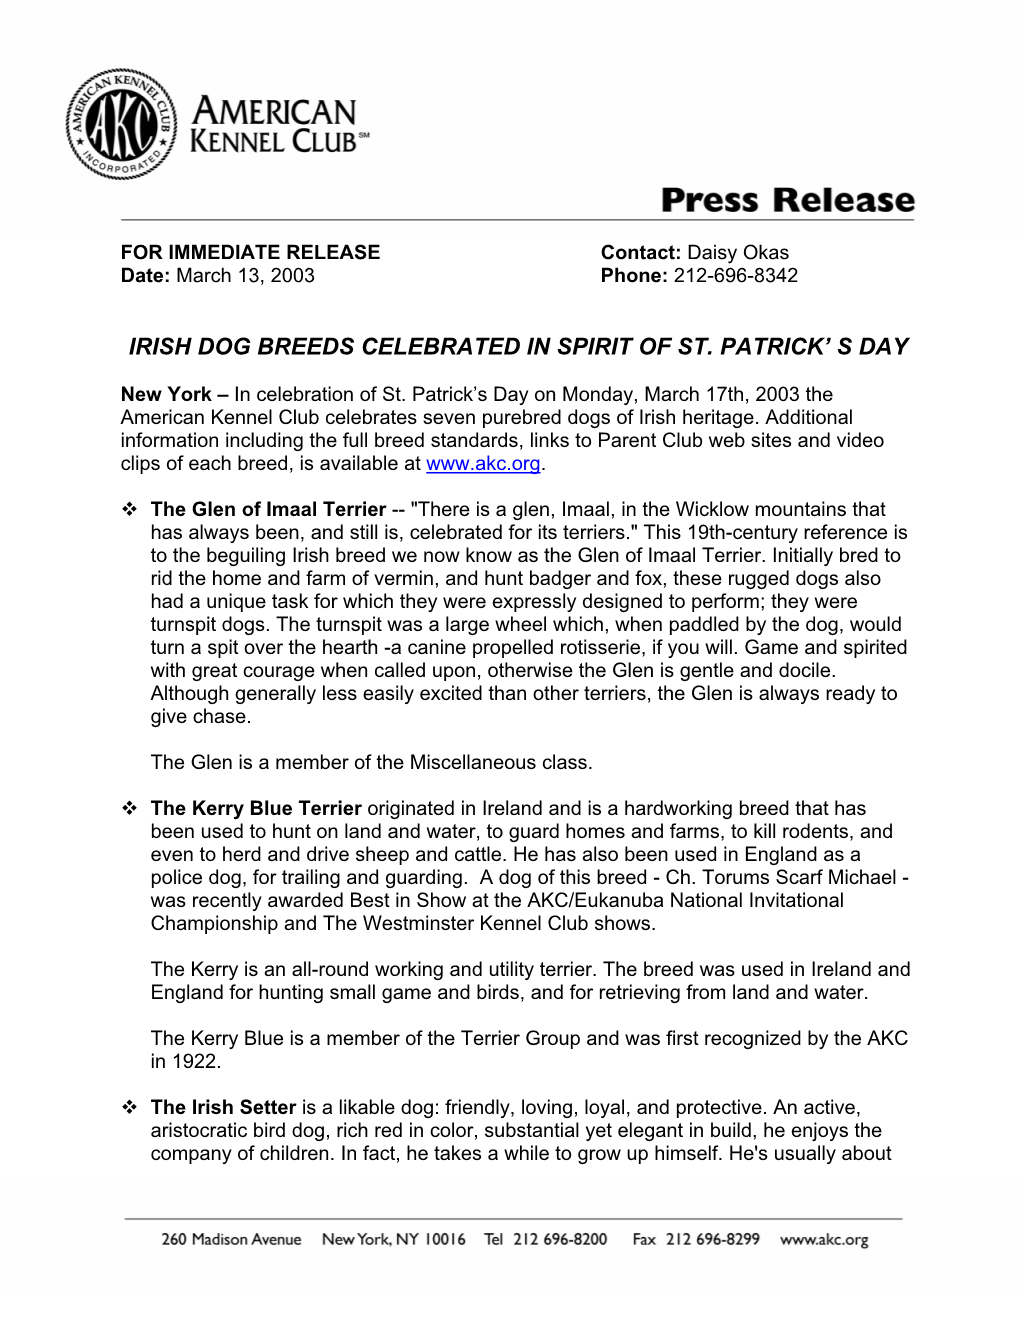 FOR IMMEDIATE RELEASE Contact: Daisy Okas Date: March 13, 2003 Phone: 212-696-8342